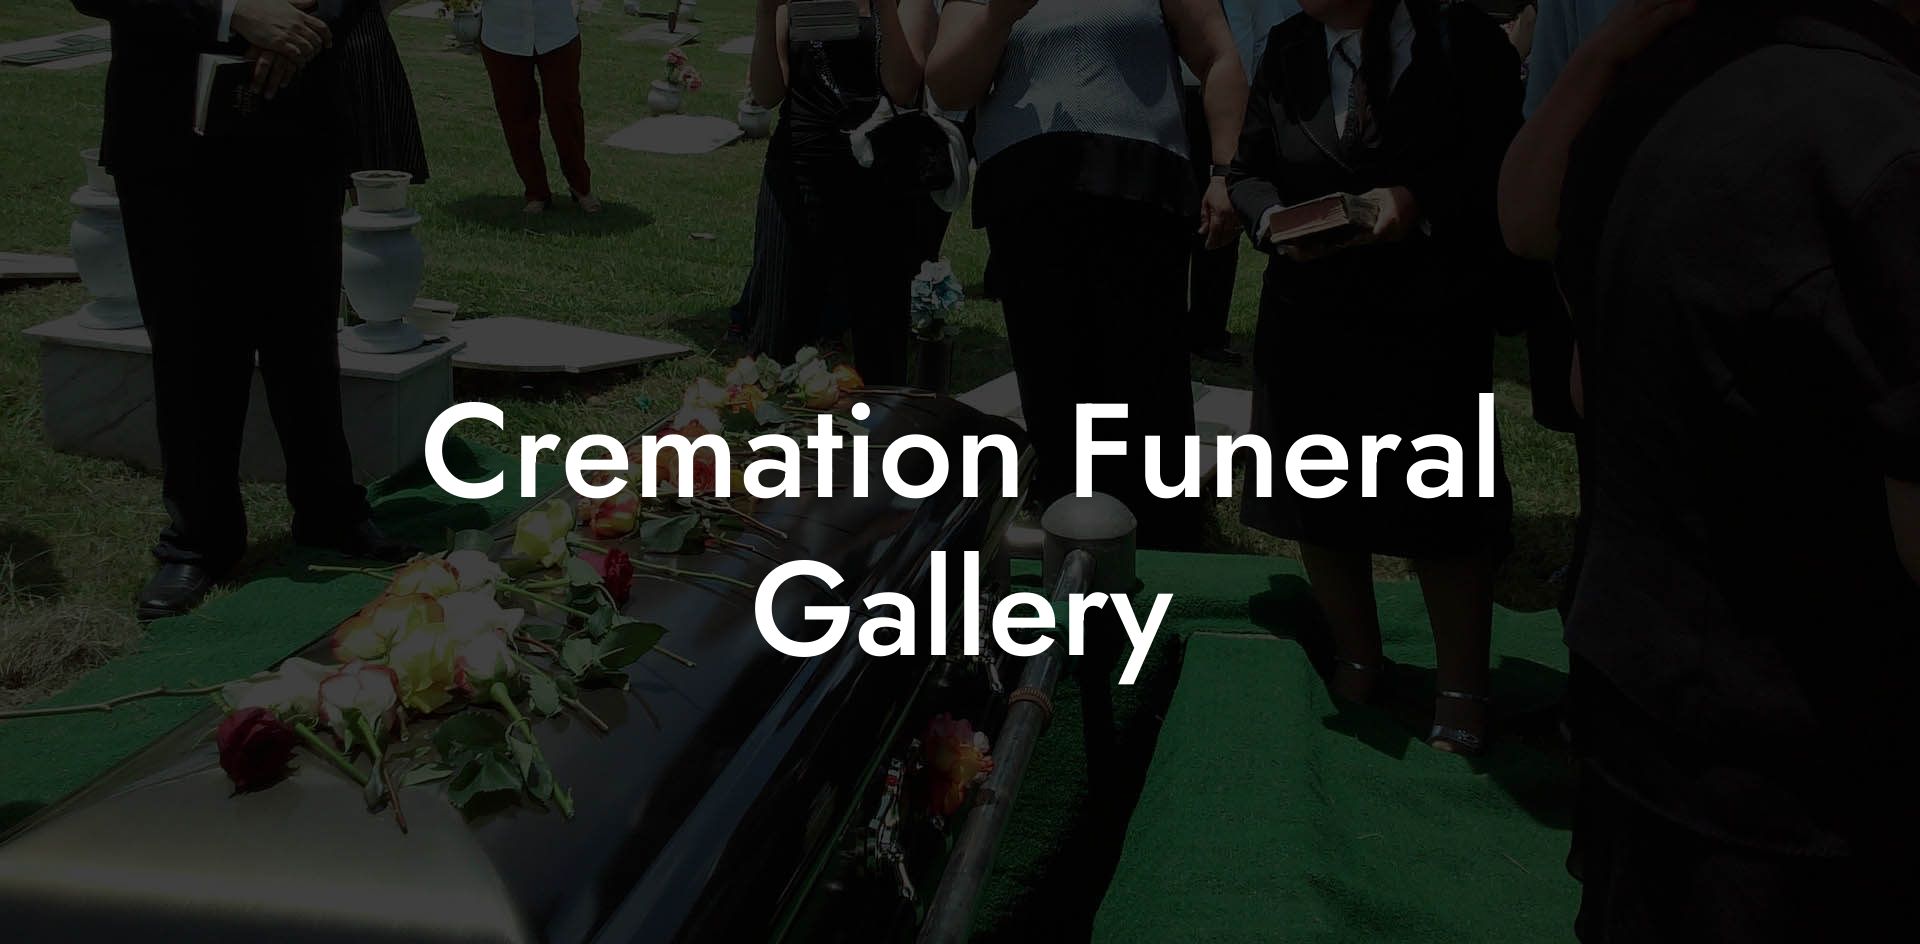 Cremation Funeral Gallery